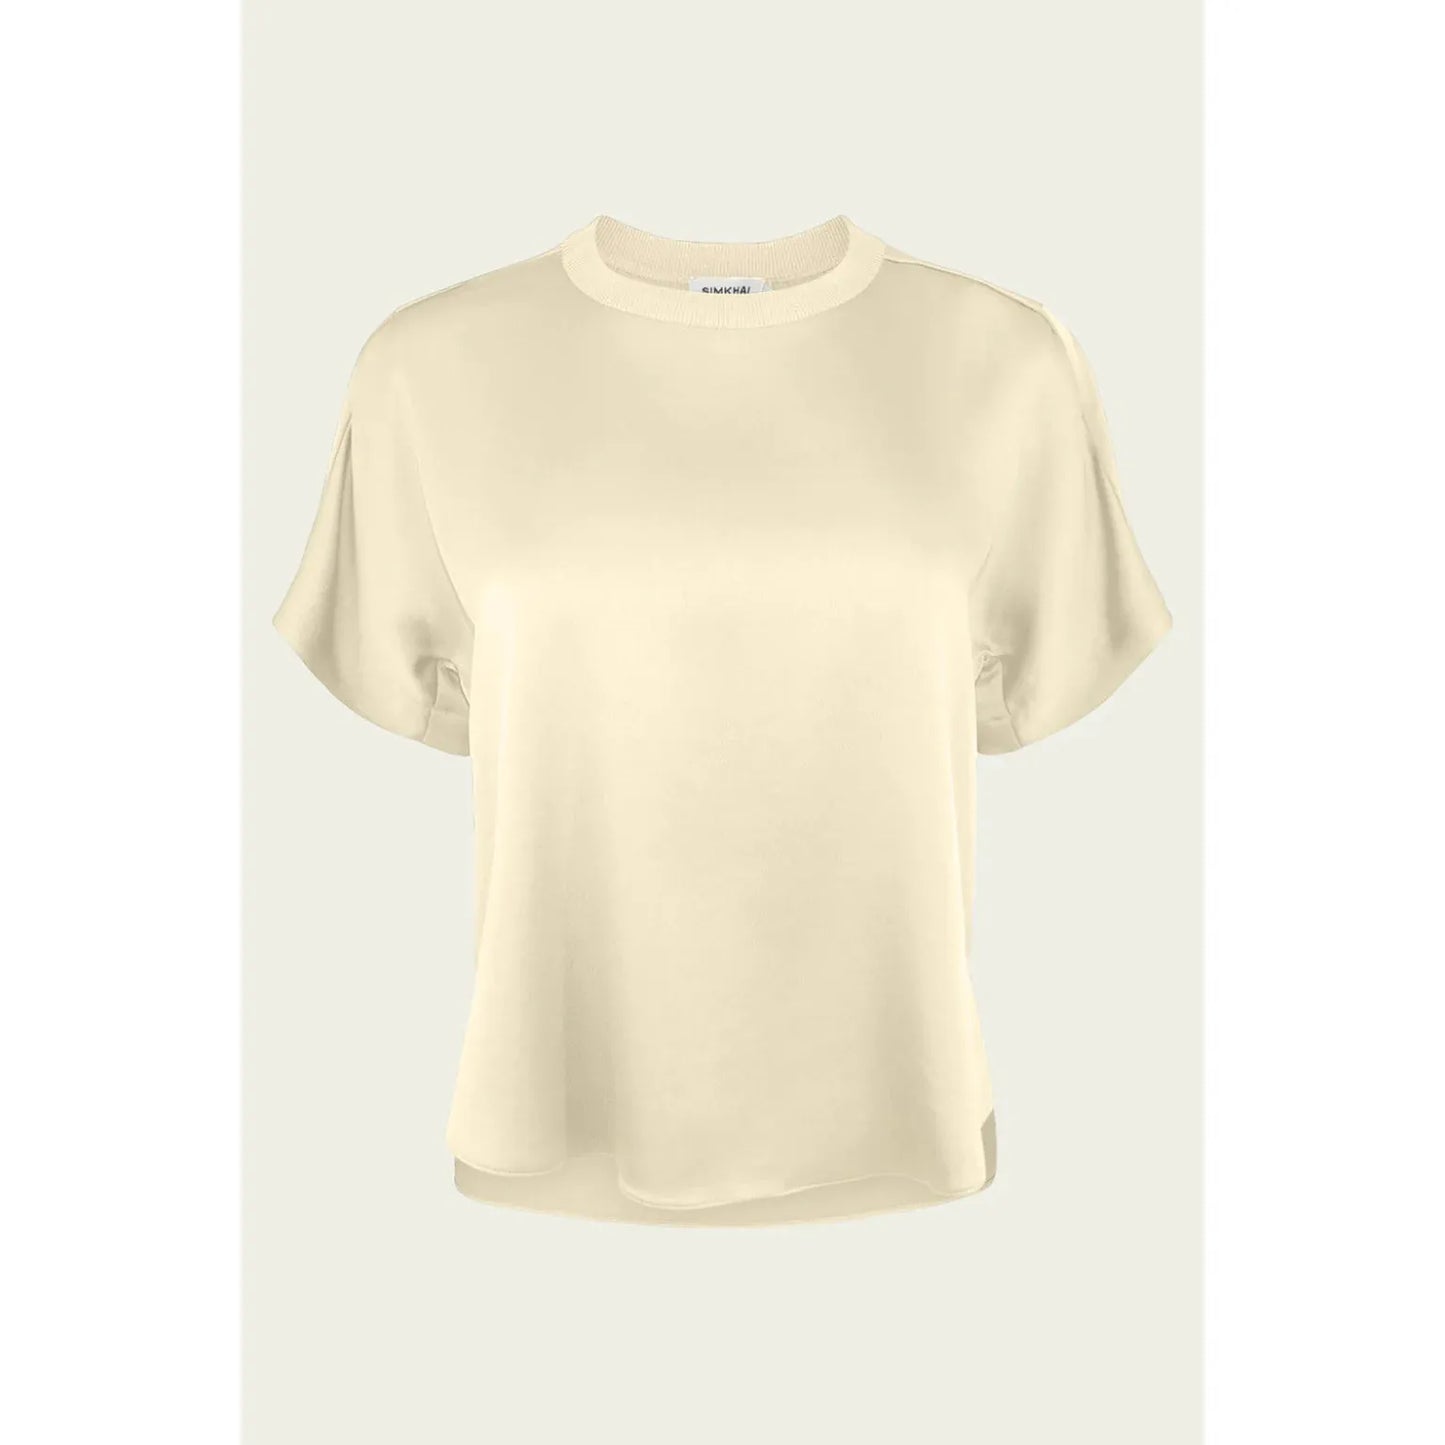 ADDY S/S KNIT BACK T-SHIRT